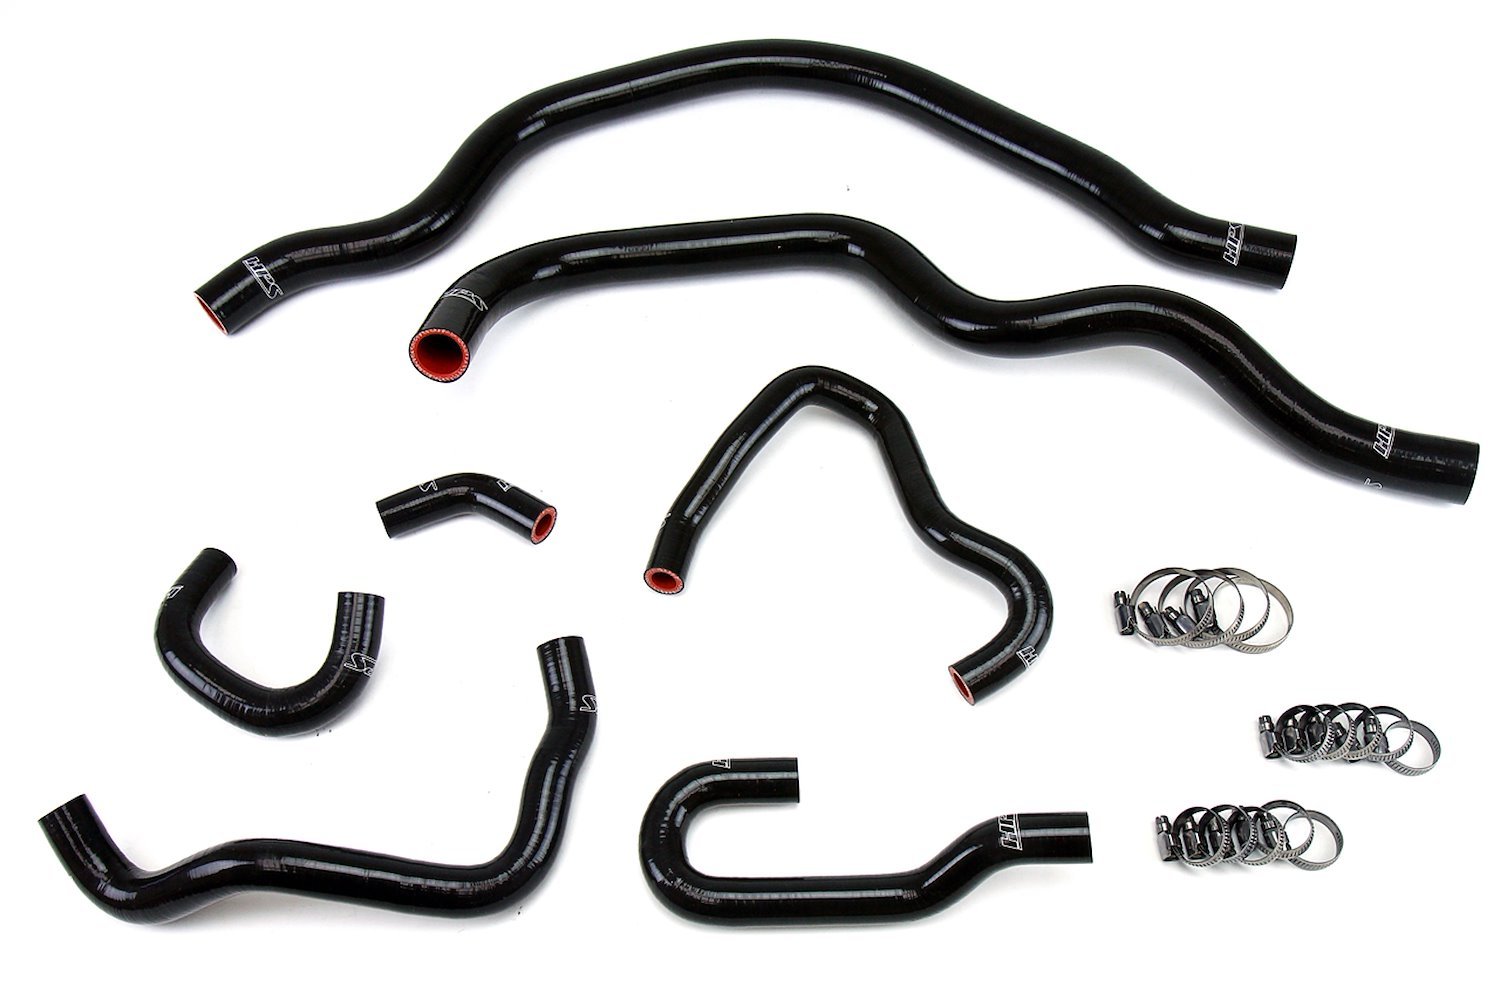 57-1489-BLK Coolant Hose Kit, High-Temp 3-Ply Reinforced Silicone, Replace Rubber Radiator Heater Coolant Hoses